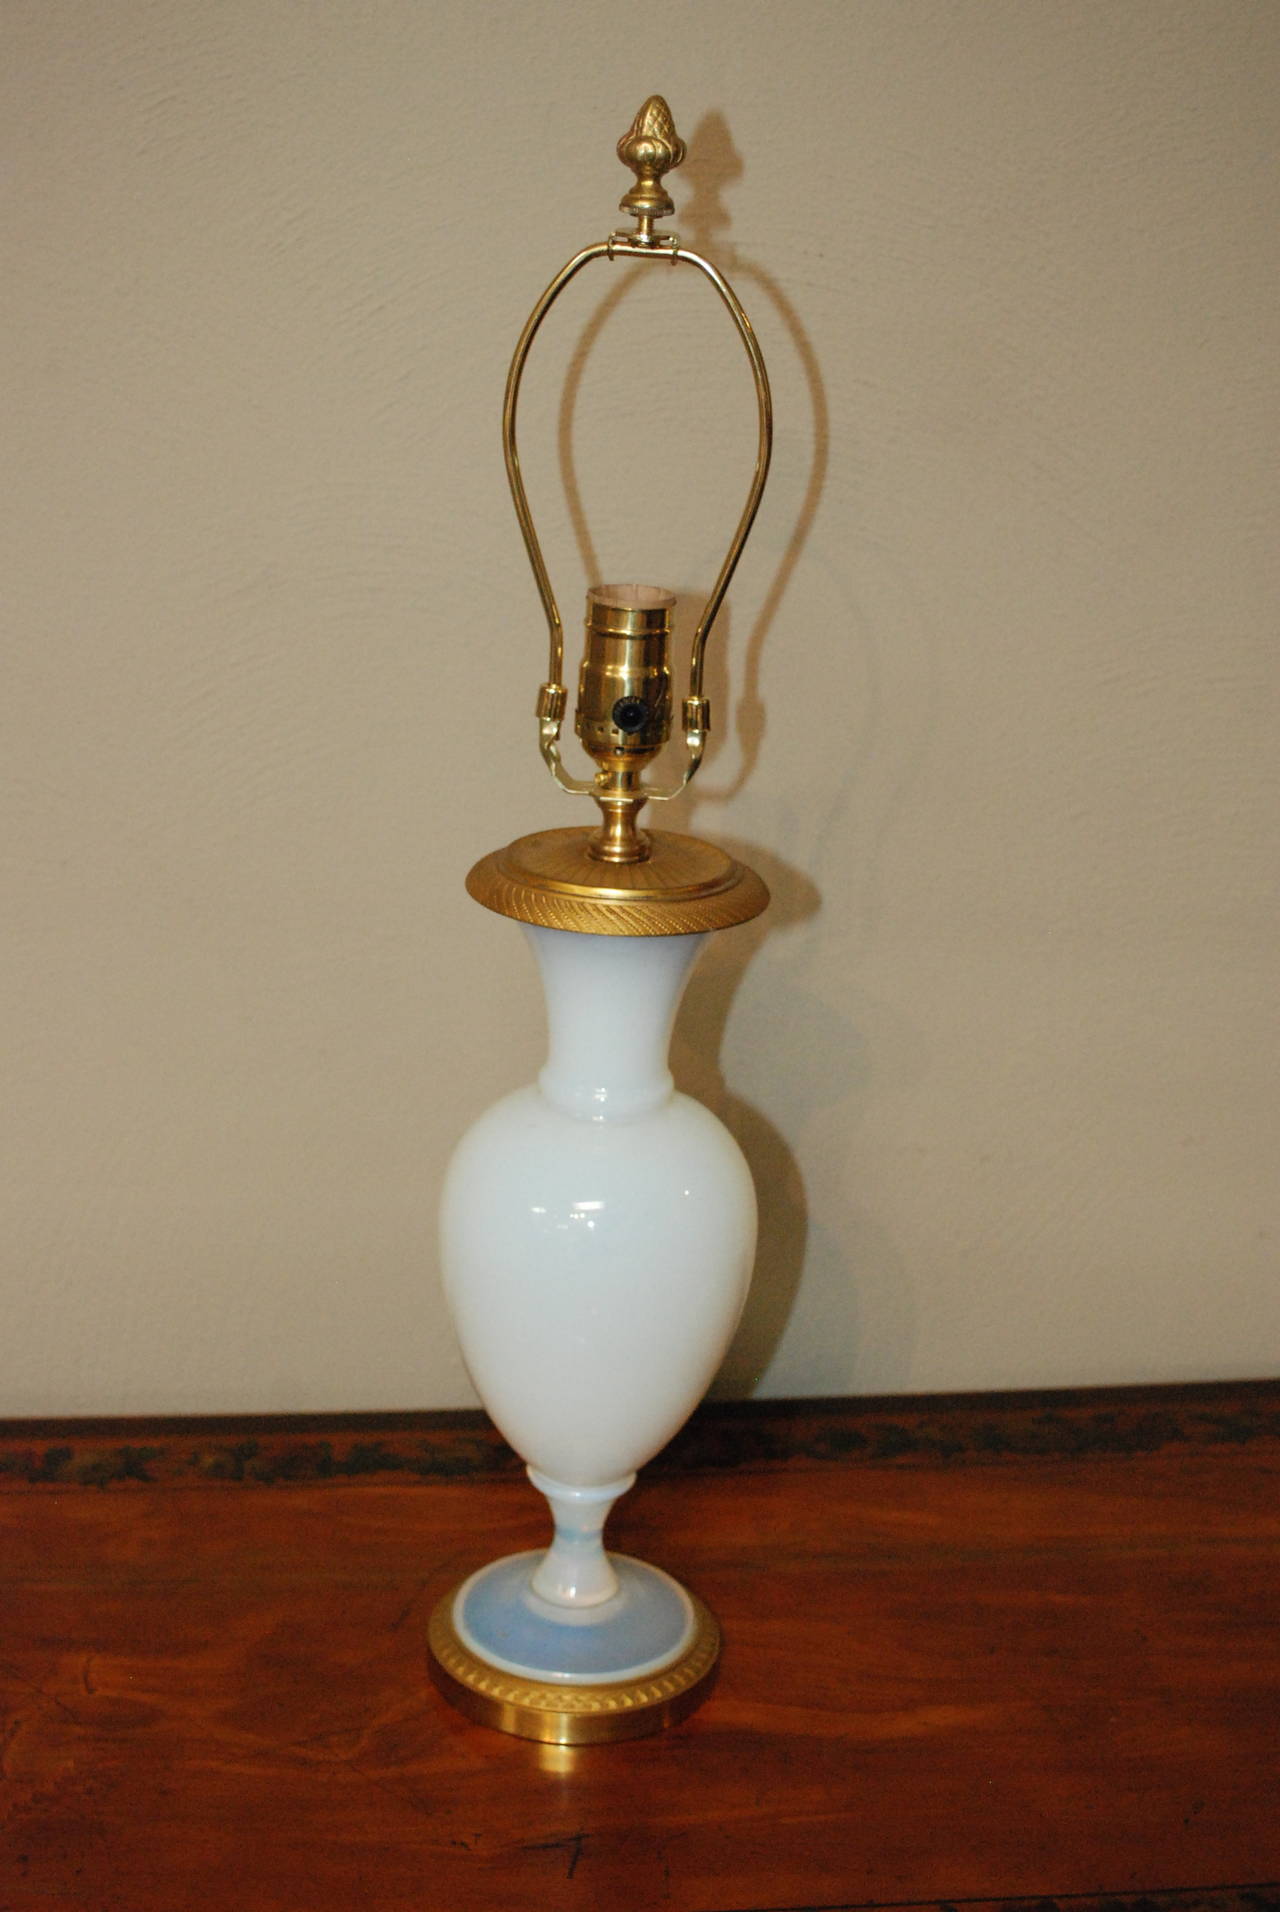 Pair of French Opaline lamps with gilded base and top.

Shades not included